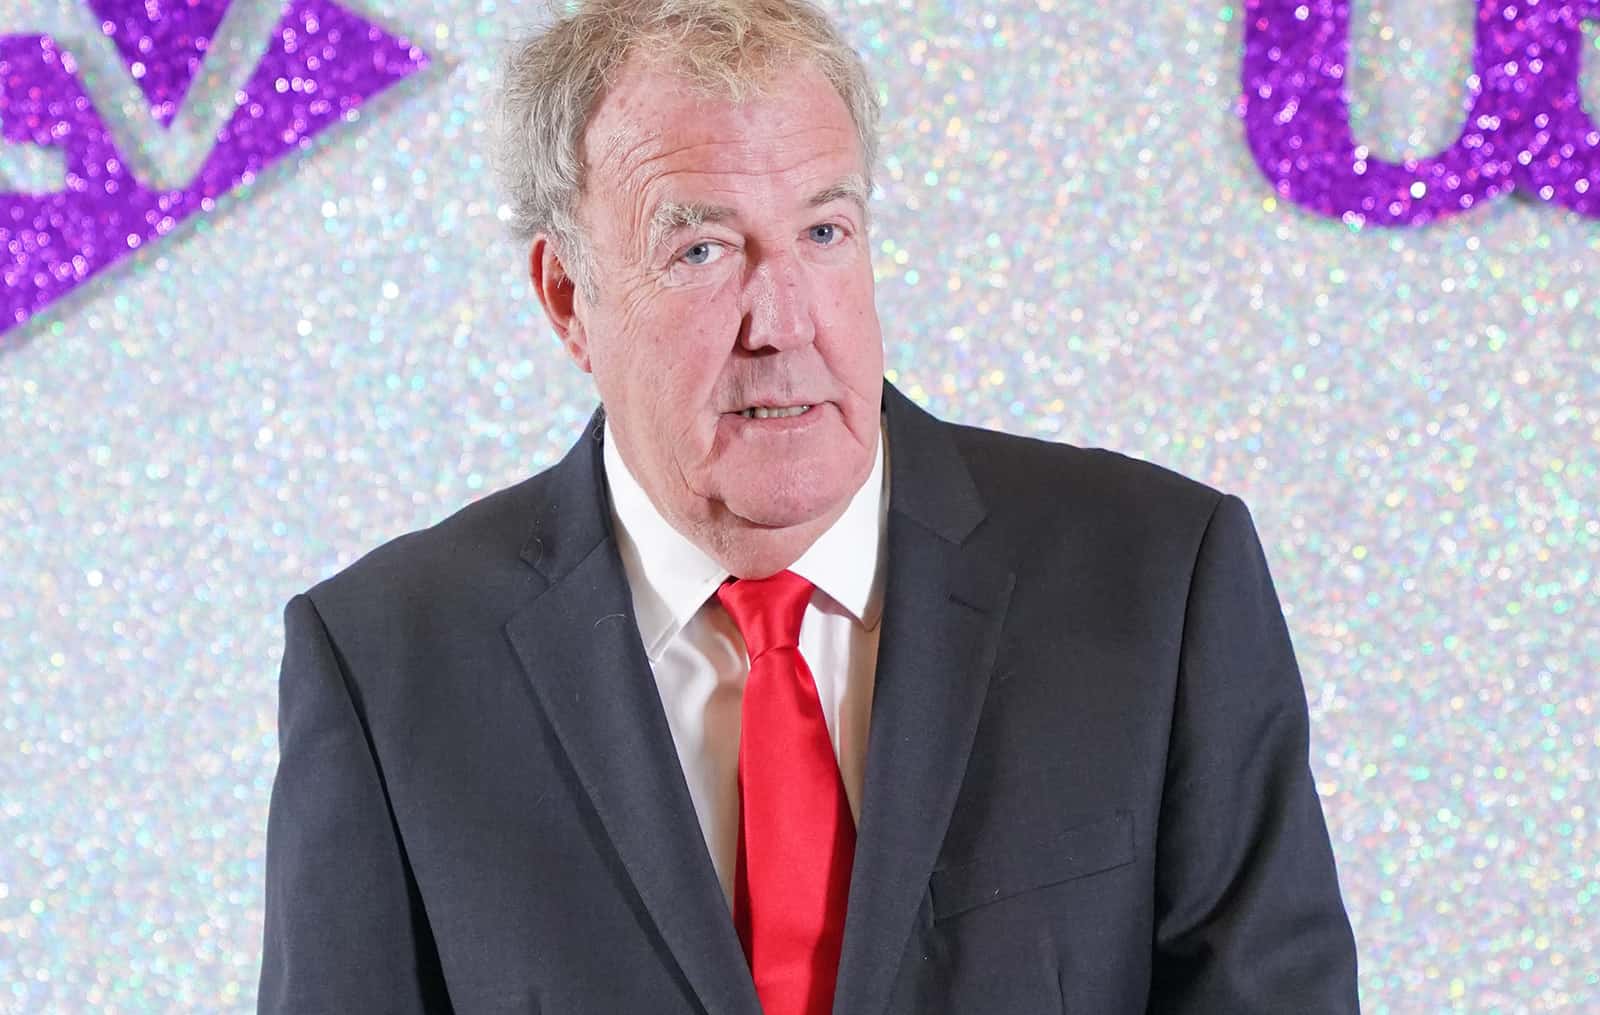 More than 60 MPs write to The S*n editor condemning Jeremy Clarkson article